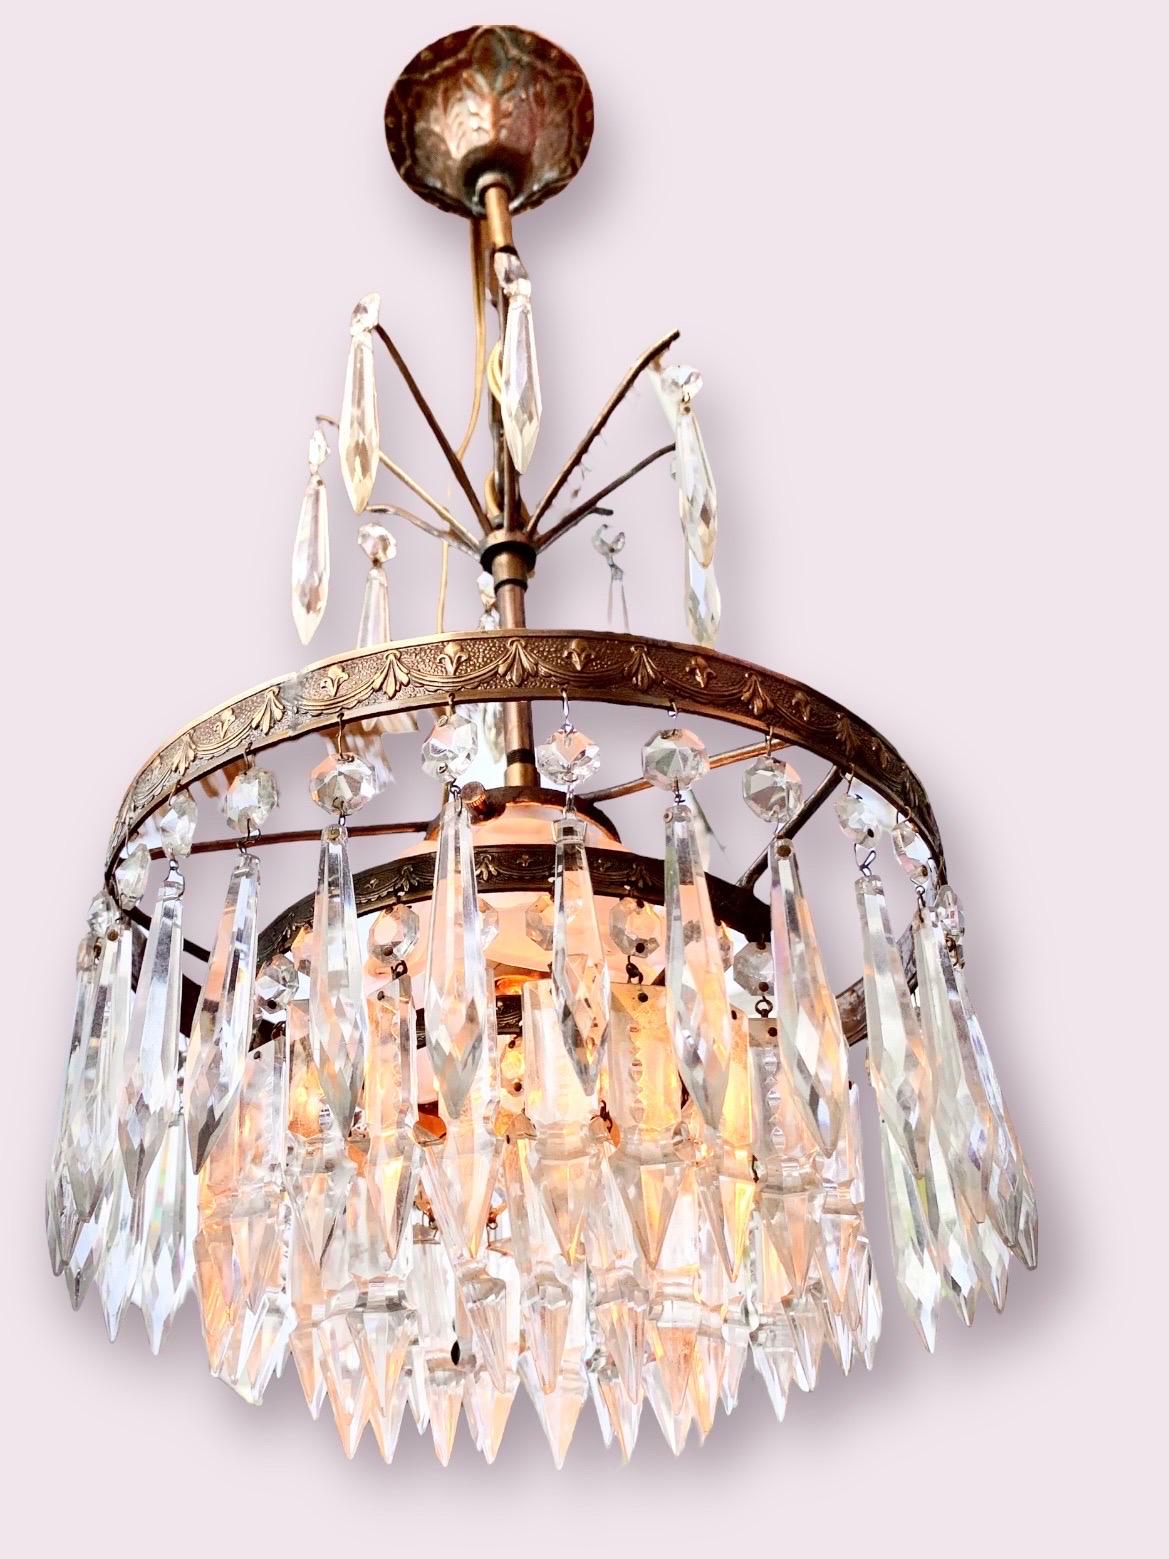 An Art Deco tiered crystal, brass and iron chandelier with a central hand made frosted glass flower shade with one light. The two brass rings having a lovely swag and fleur-de-lis design.

This Is a petite chandelier that would be well suited for a